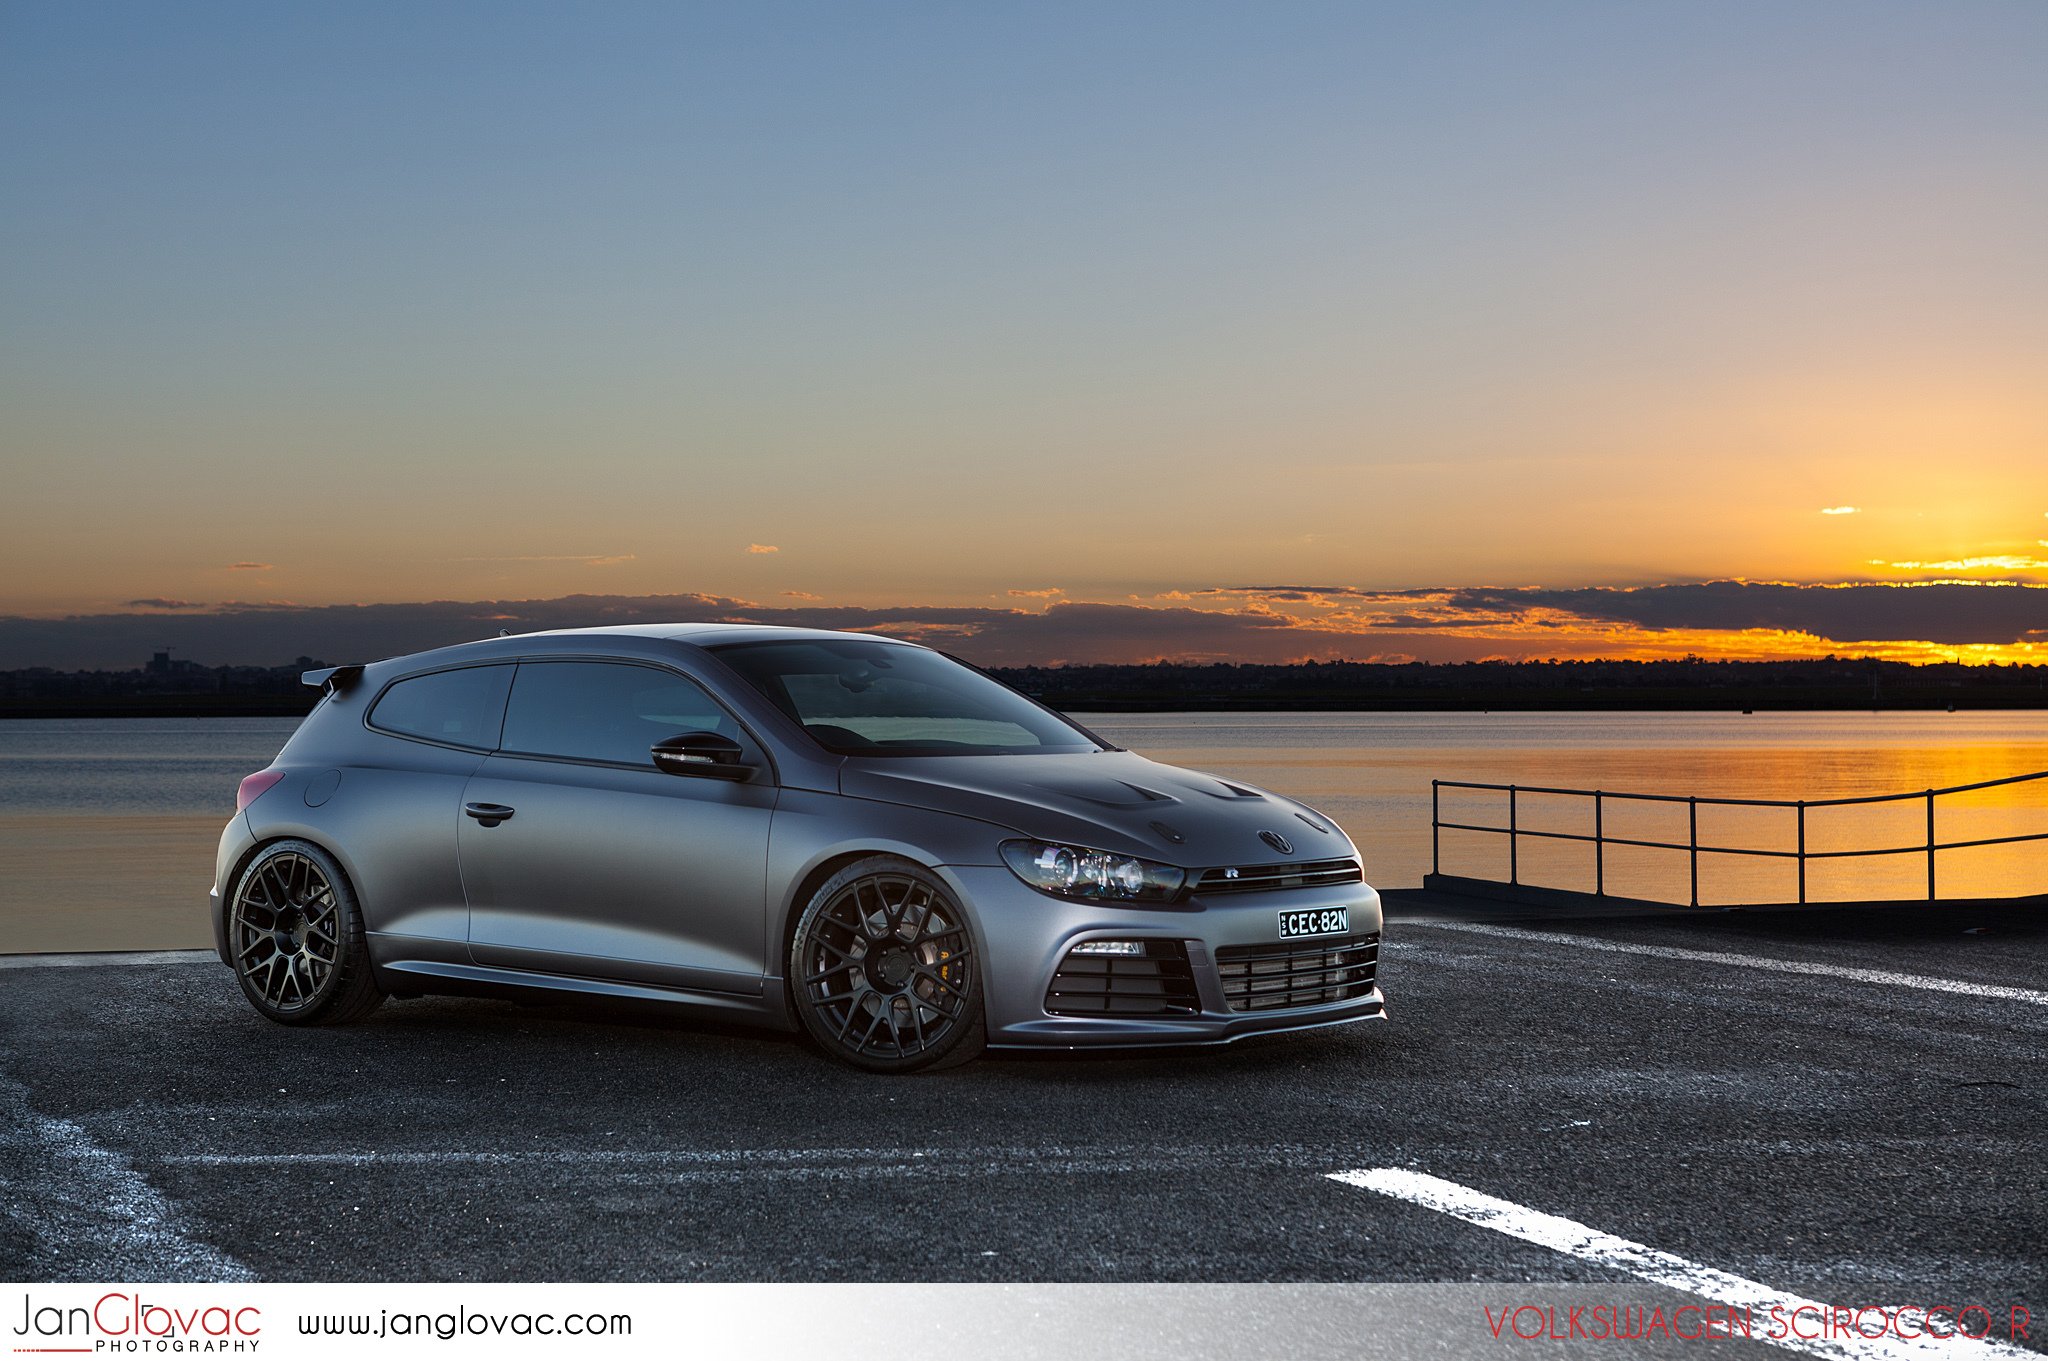 132.000 km, 12/2011, 103 kw (140 ps), diesel, ca. volkswagen, Scirocco, Cars, Coupe, Germany Wallpapers HD